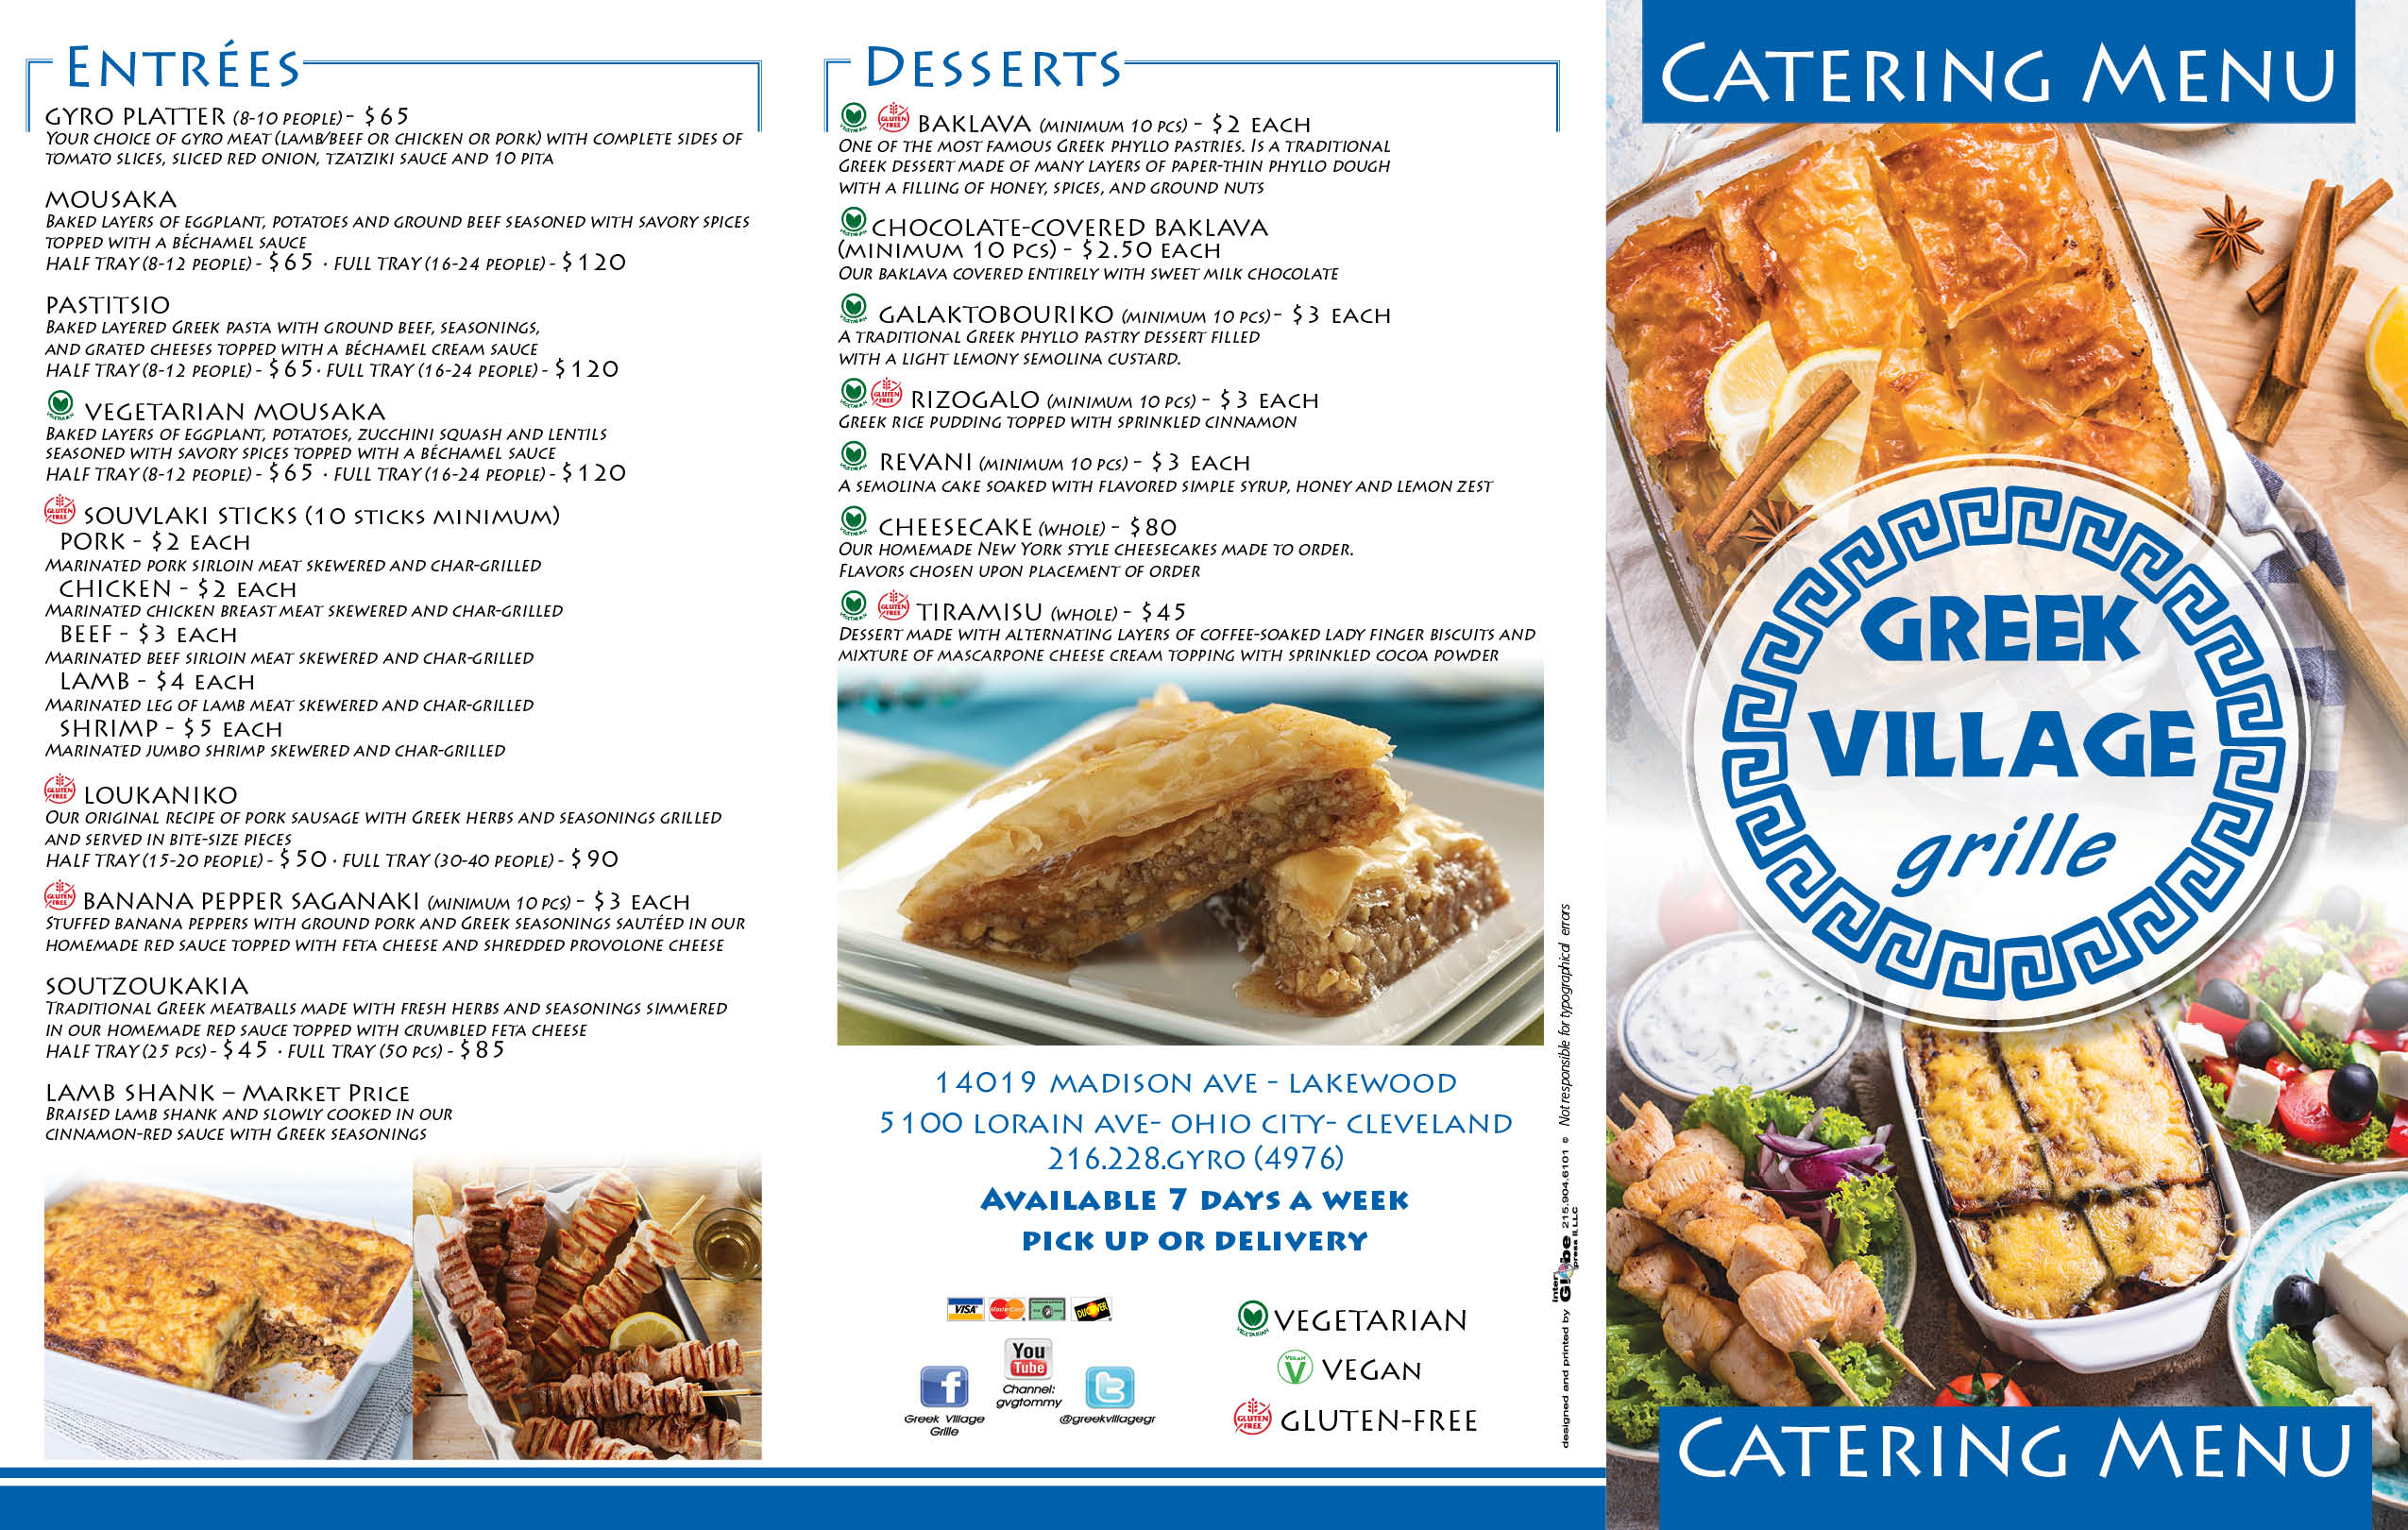 Menu of The Greek Village Grille in Lakewood & Broadview Heights Ohio serving the best Greek food including Gyros, Salads and much more.